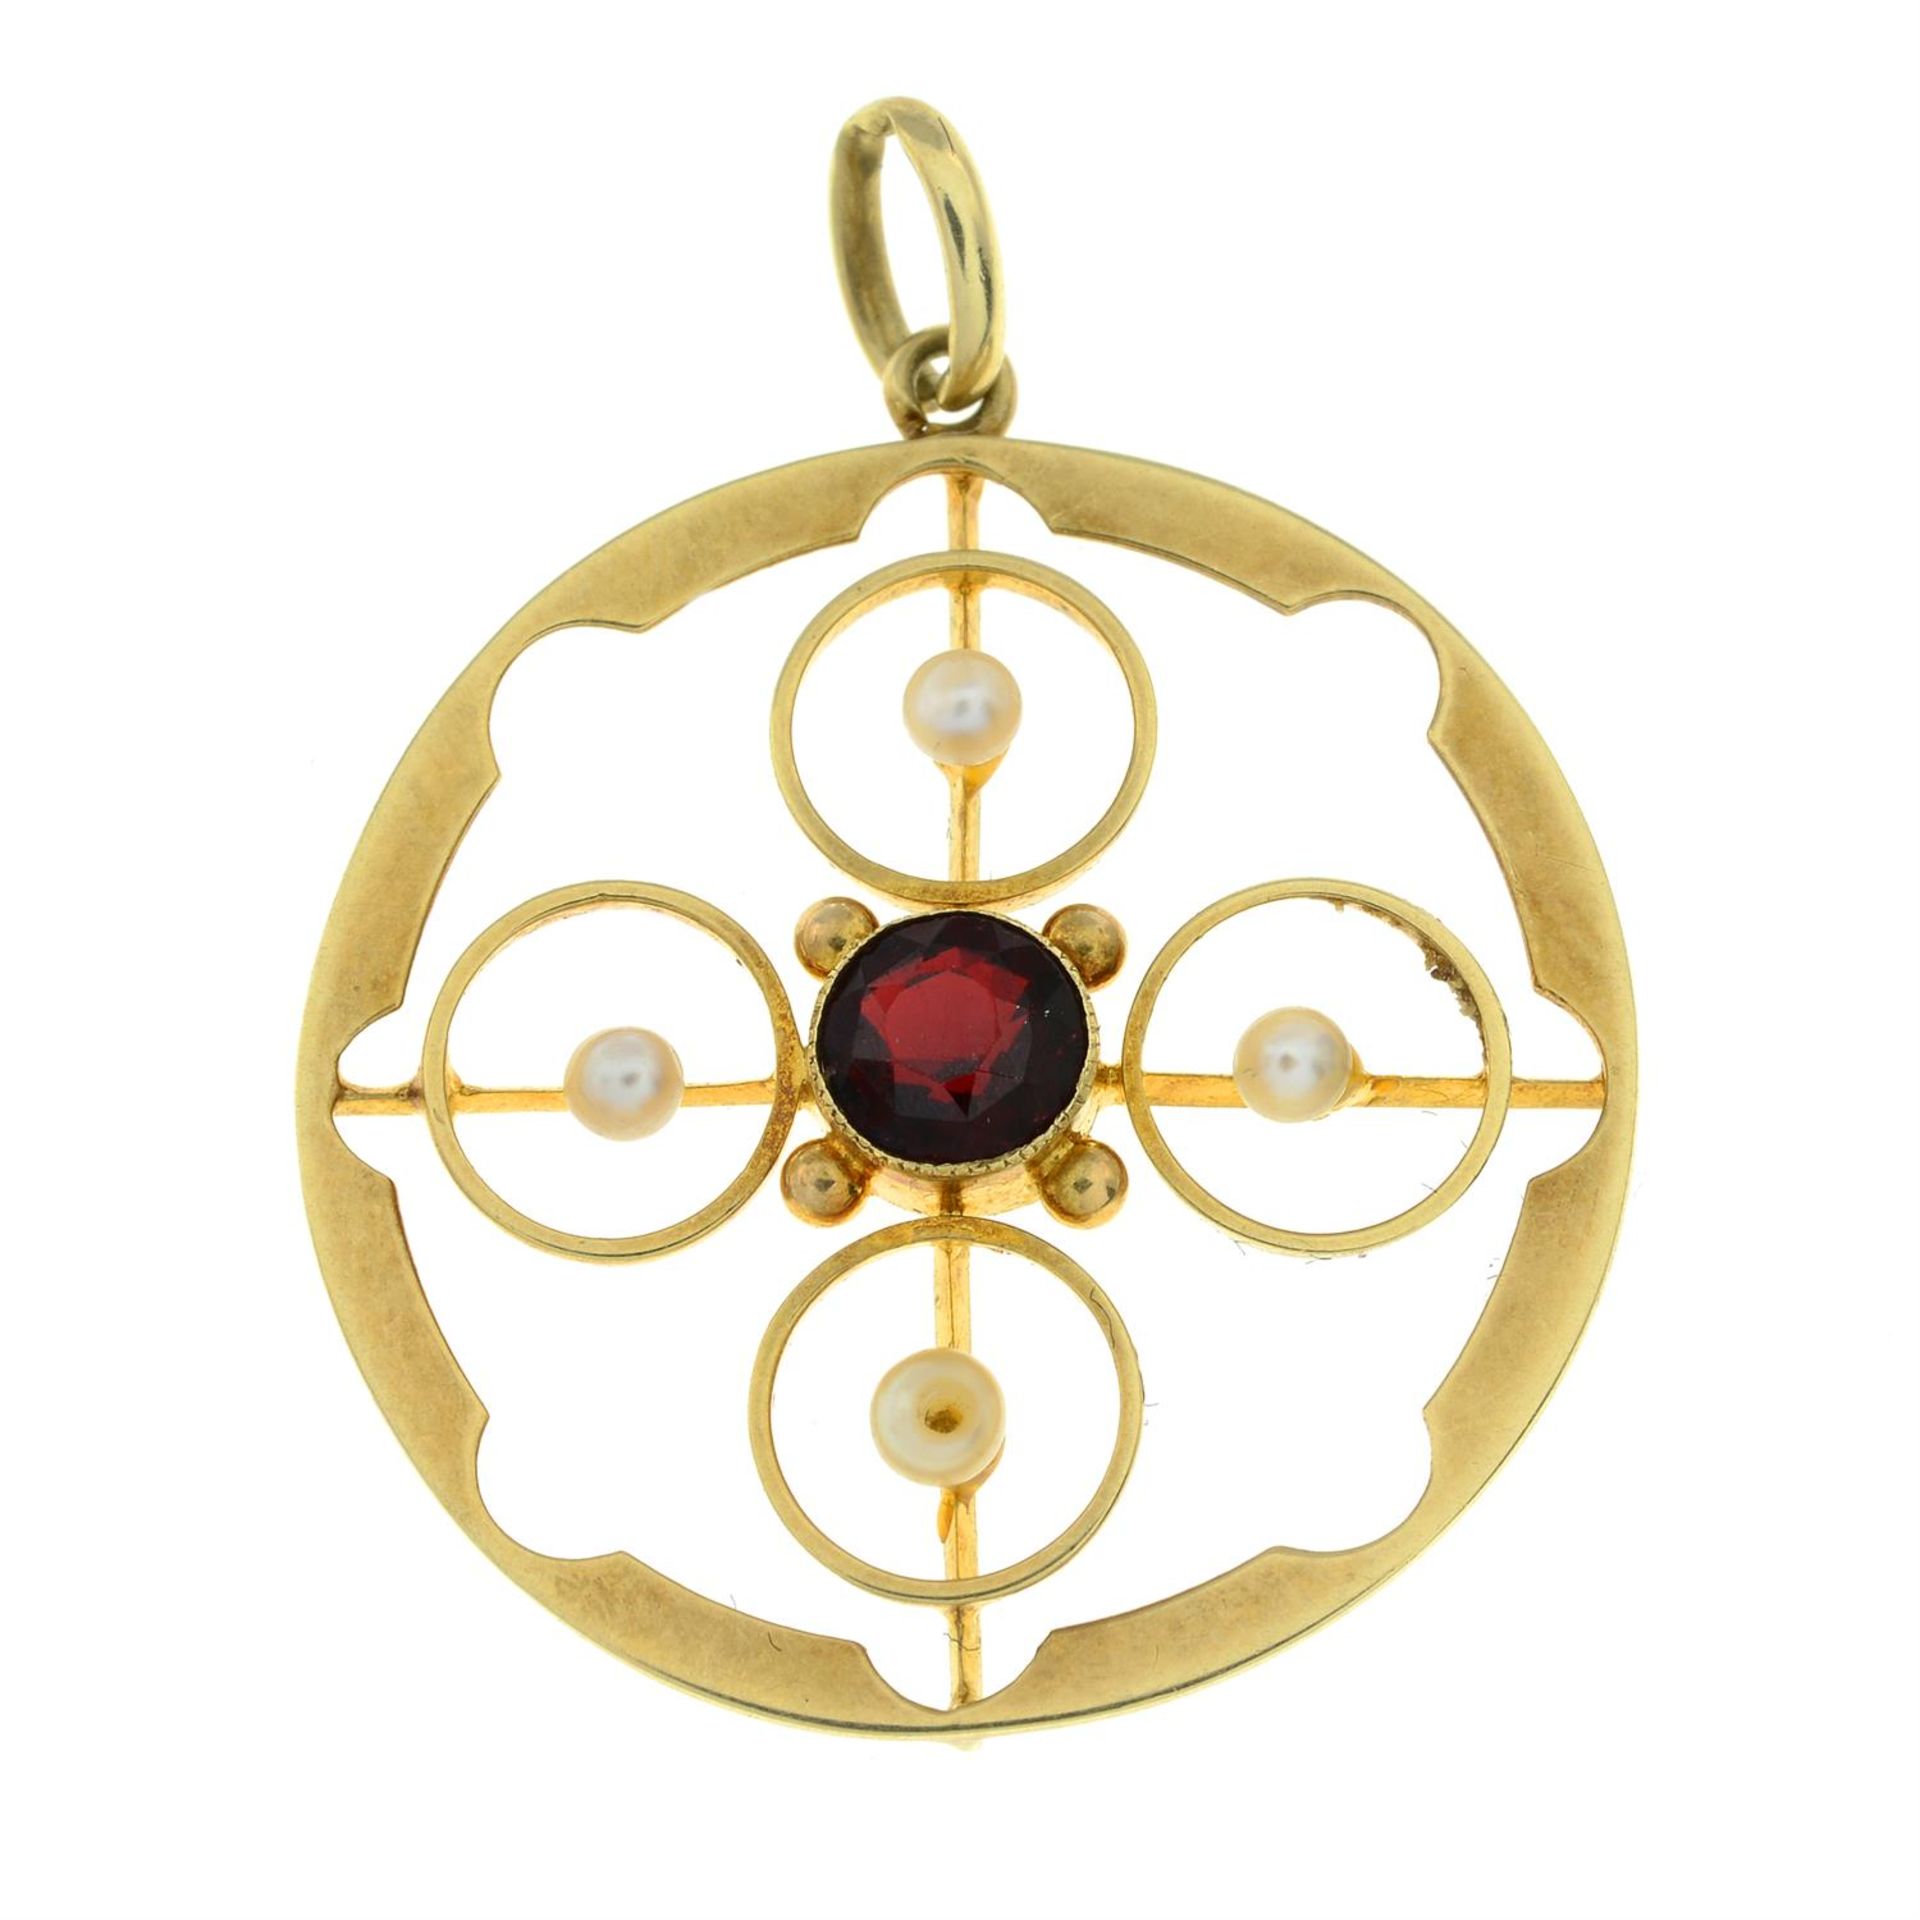 An early 20th century 15ct gold garnet-topped-doublet and seed pearl pendant.